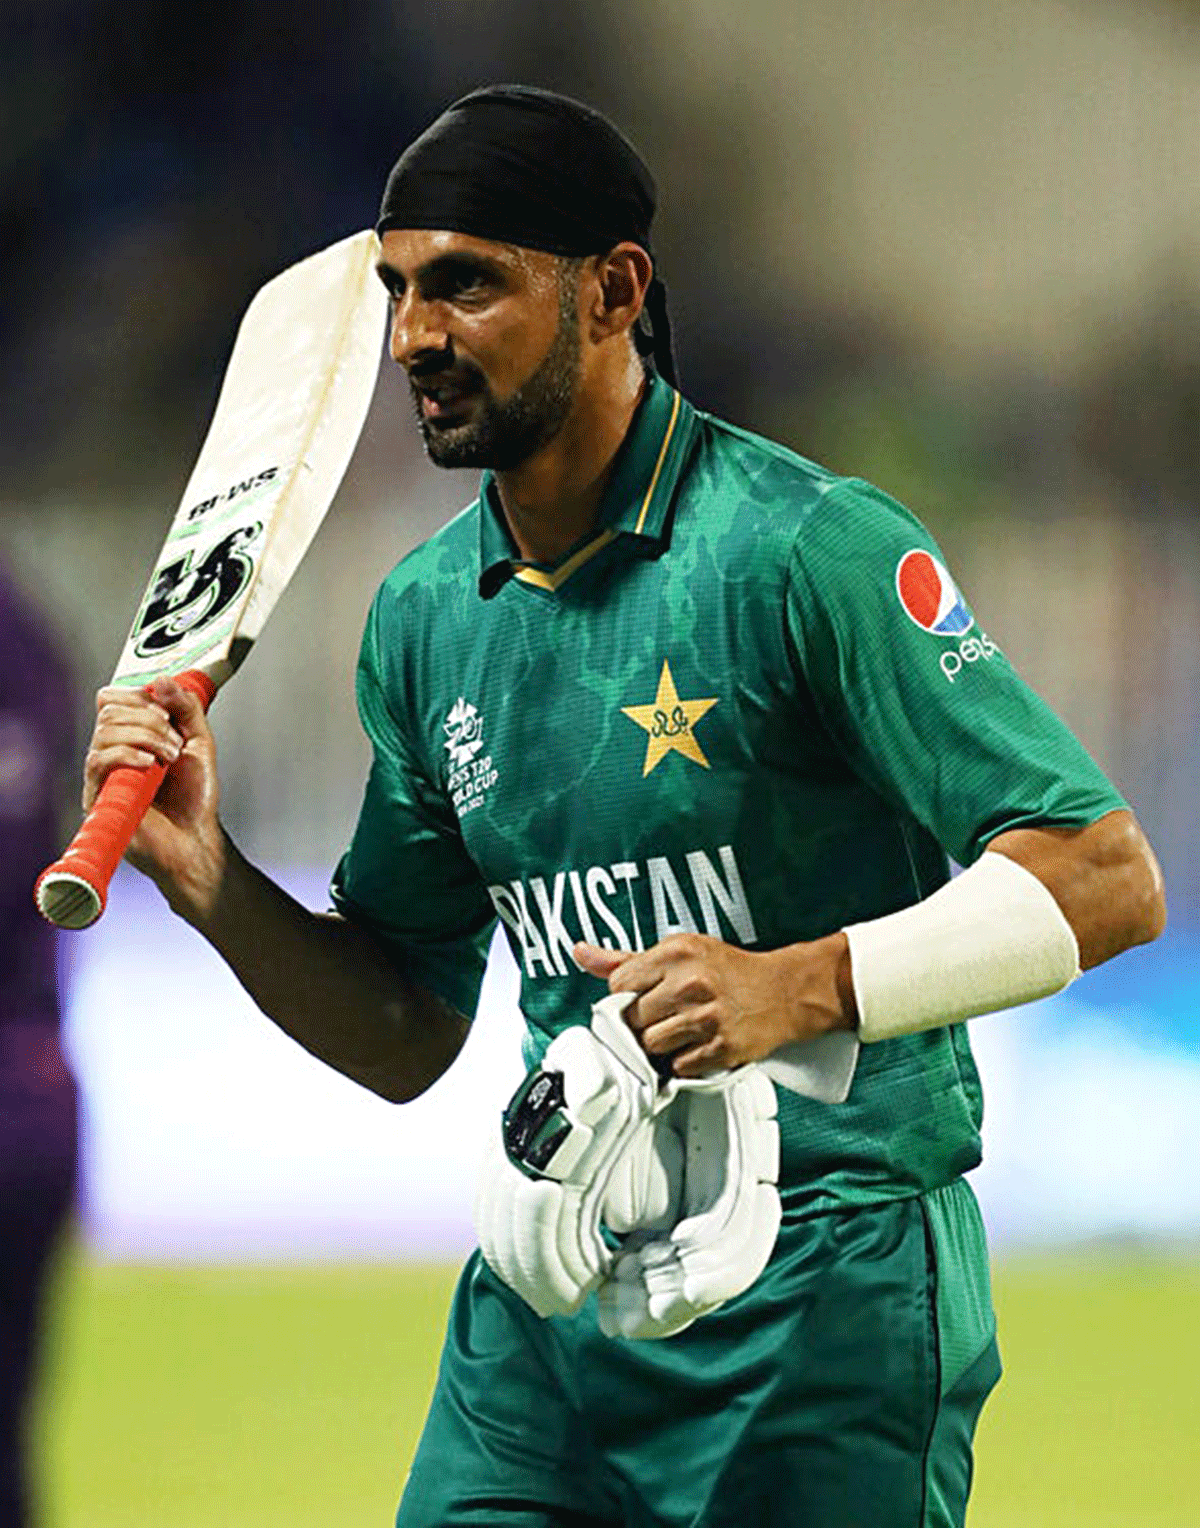 Shoaib Malik hit six sixes in what was Pakistan's fastest-ever T20I fifty and the eighth quickest of all time.